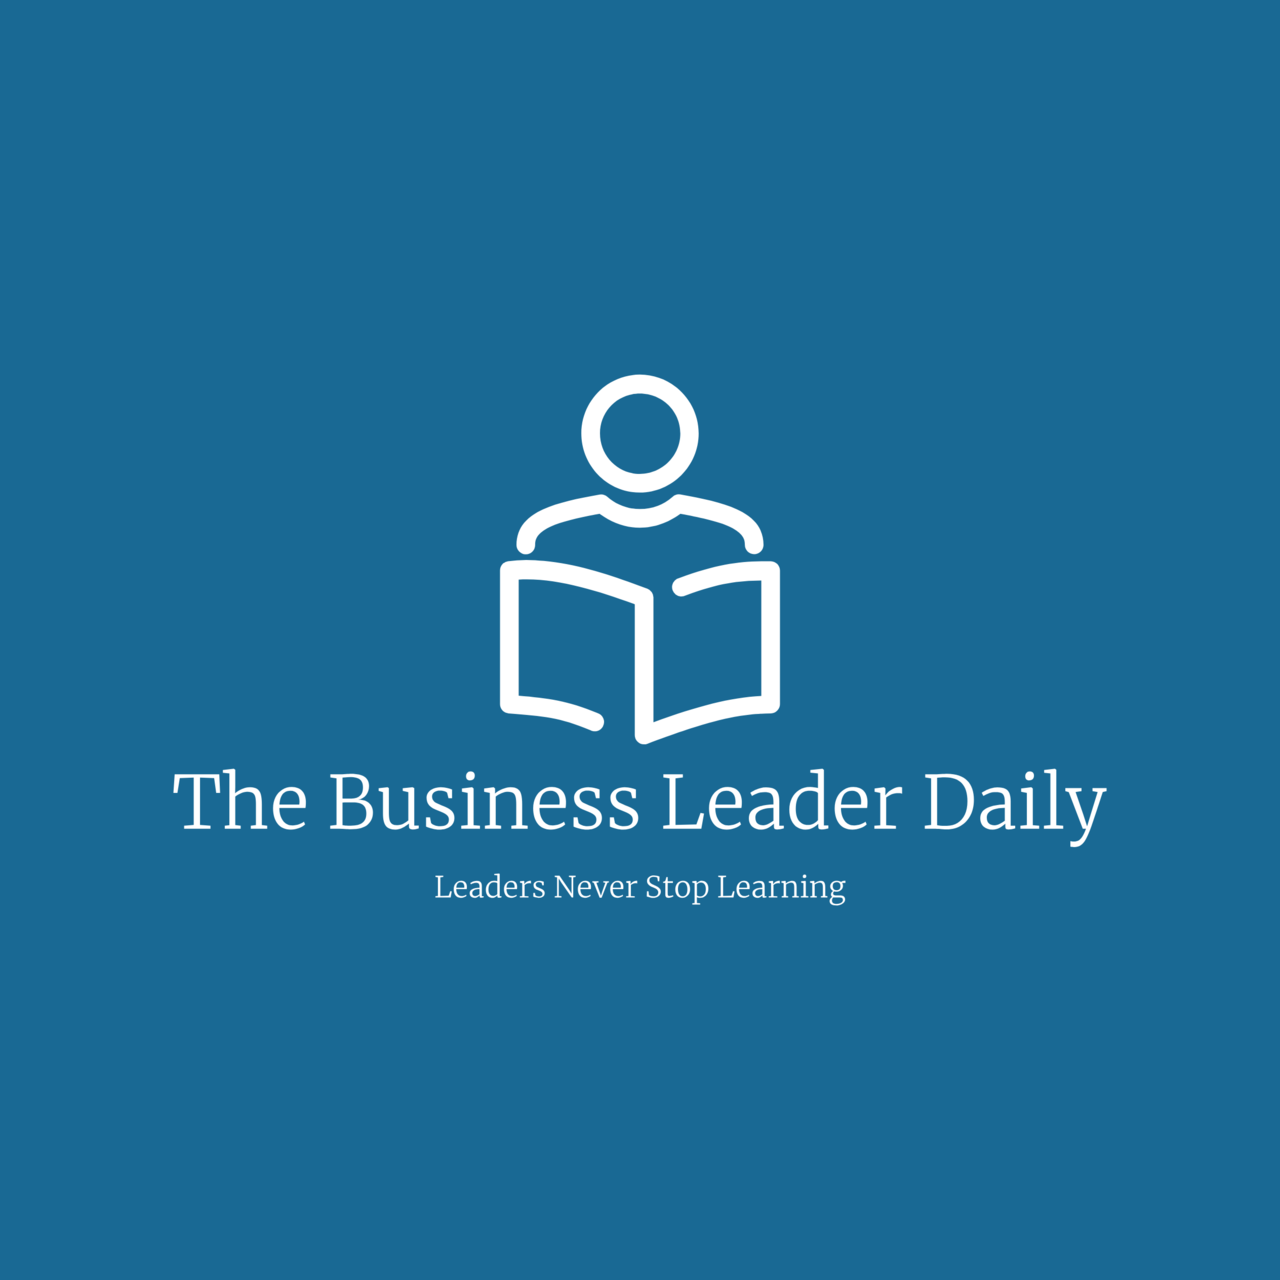 The Business Leader Daily